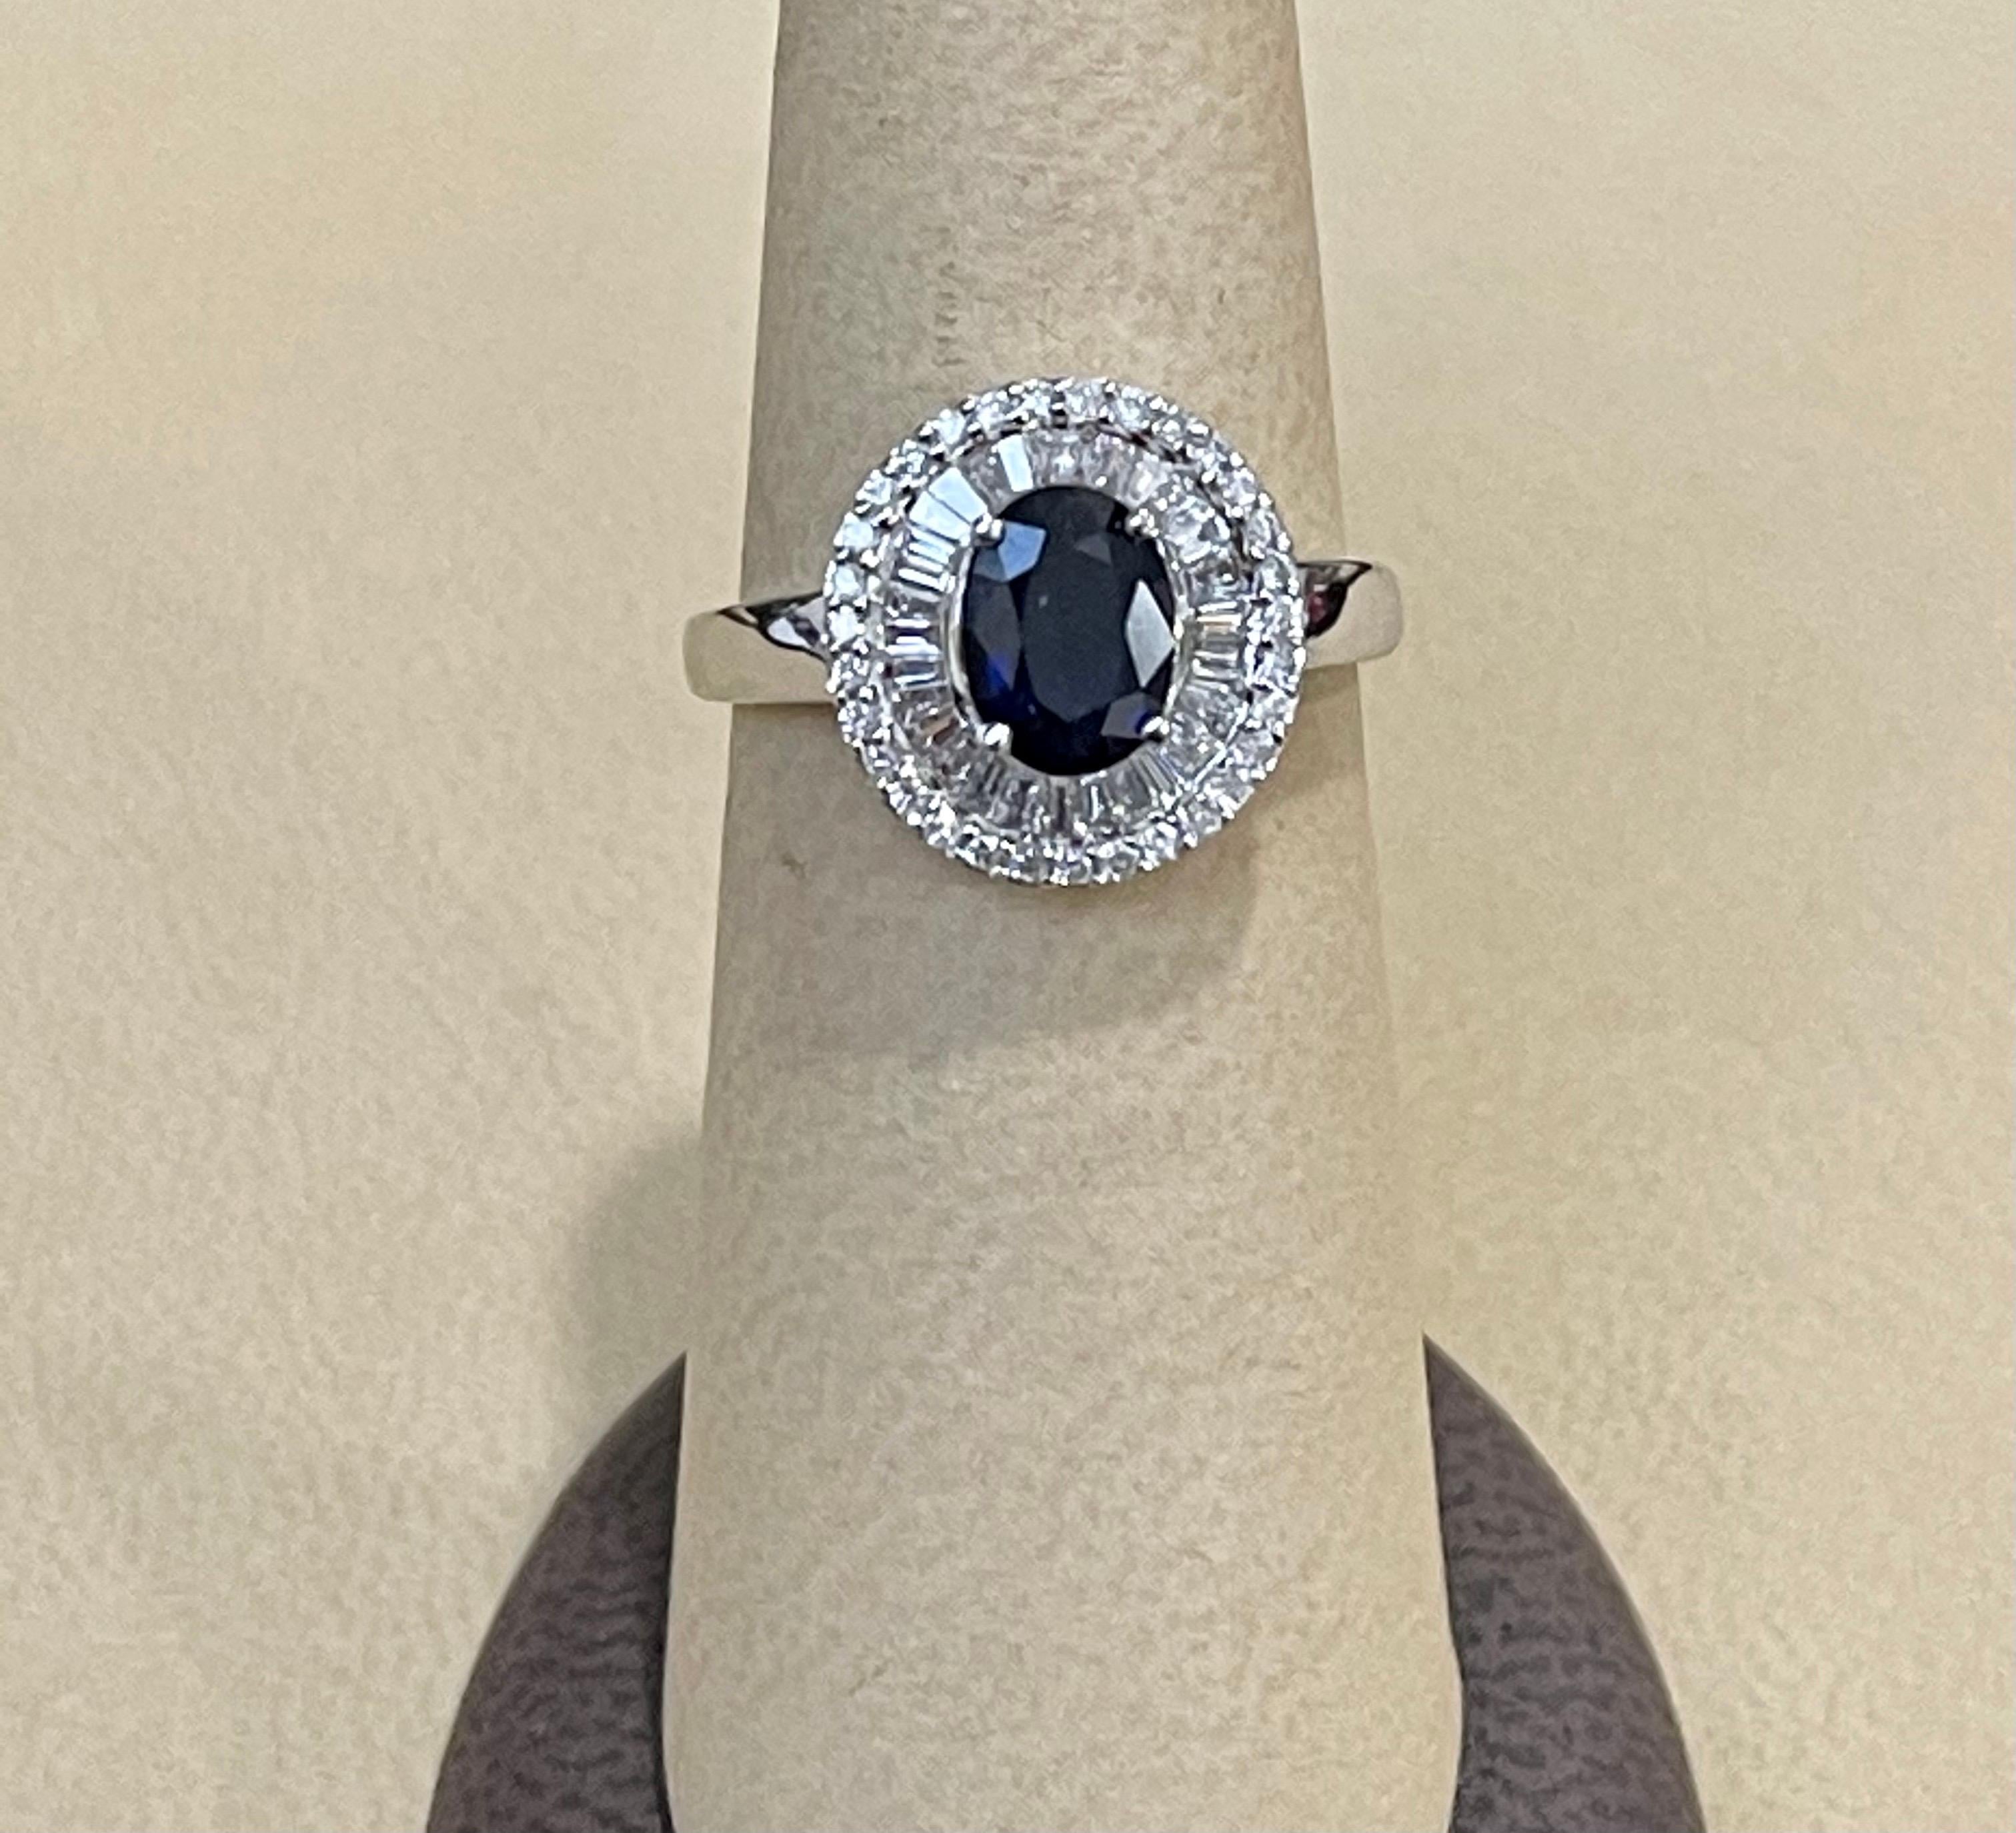 Designer Effy's 1.42 Ct Blue Sapphire & 0.52 Ct Diamond Cocktail Ring in 14 Karat White Gold
Baguettes cut diamond 65 piece 
14 Karat White Gold 4.1Grams
1.42 Ct Natural Diffused Ceylon Sapphire 
Ring Size 7  ( it can be resized to any size for free